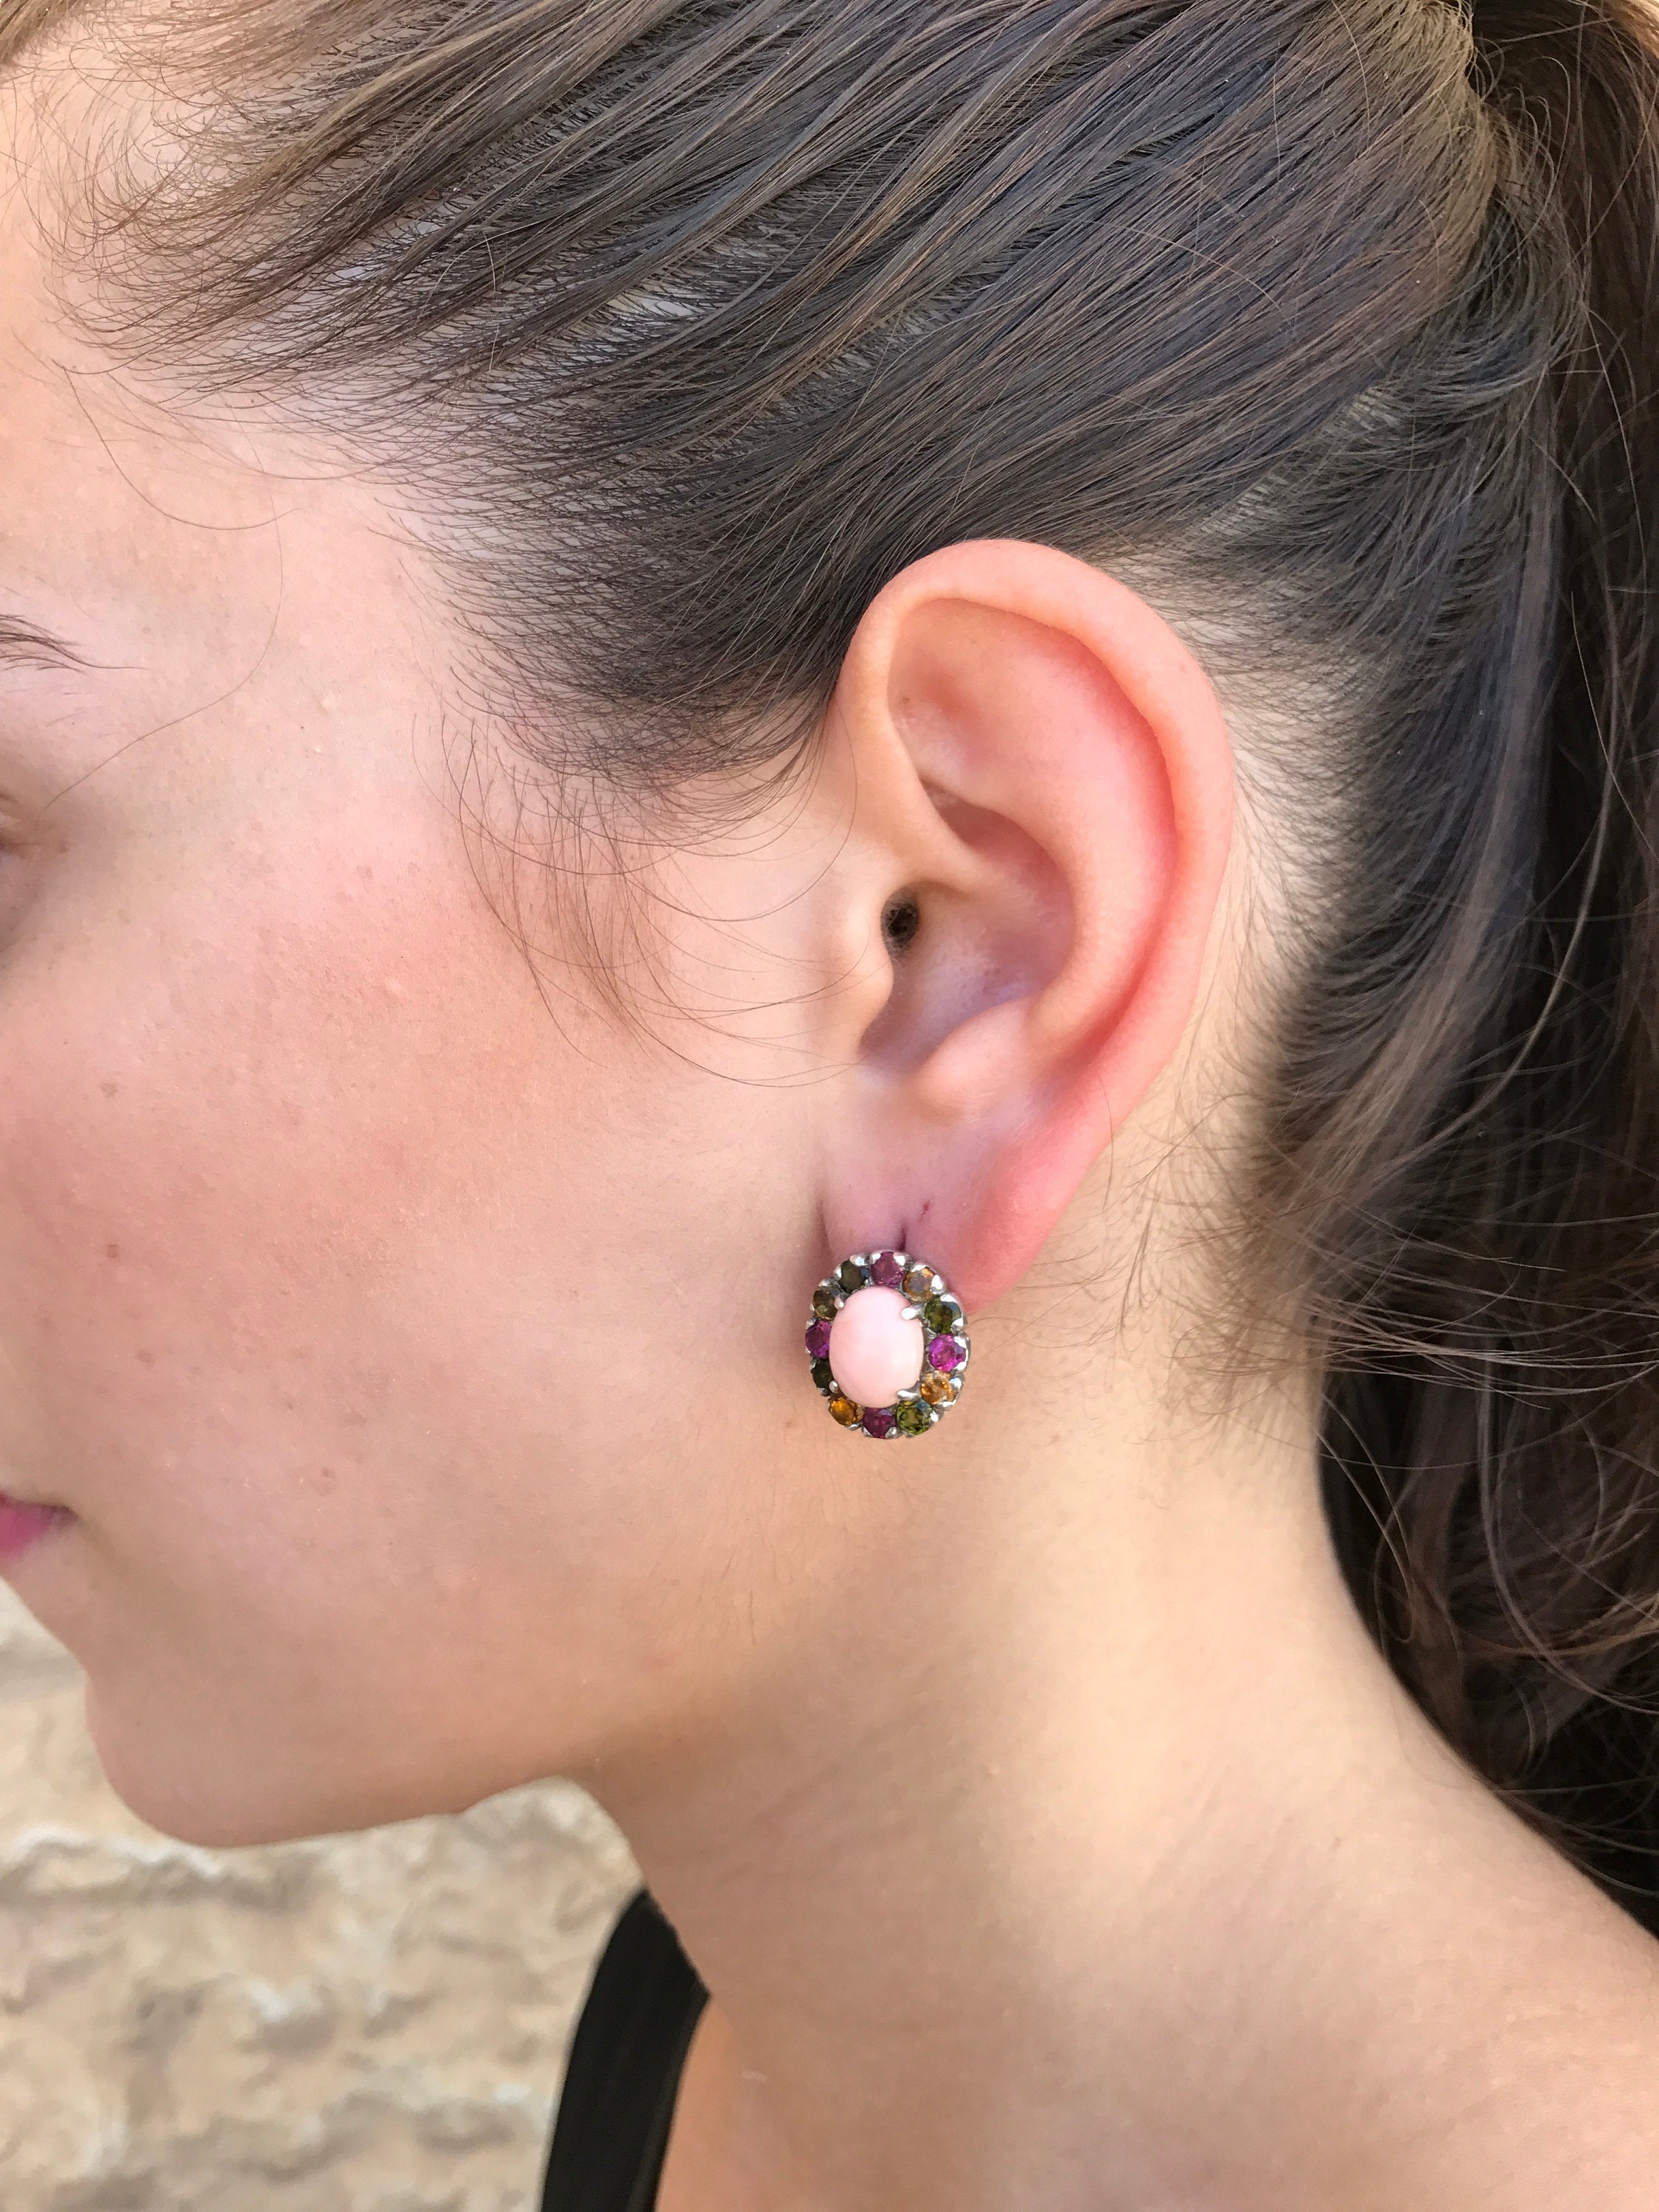 Tourmaline Earrings, Pink Tourmaline, Natural Tourmaline, Pink Earrings, 3 Carats, October Birthstone, Birthstone Earrings, Solid Silver,